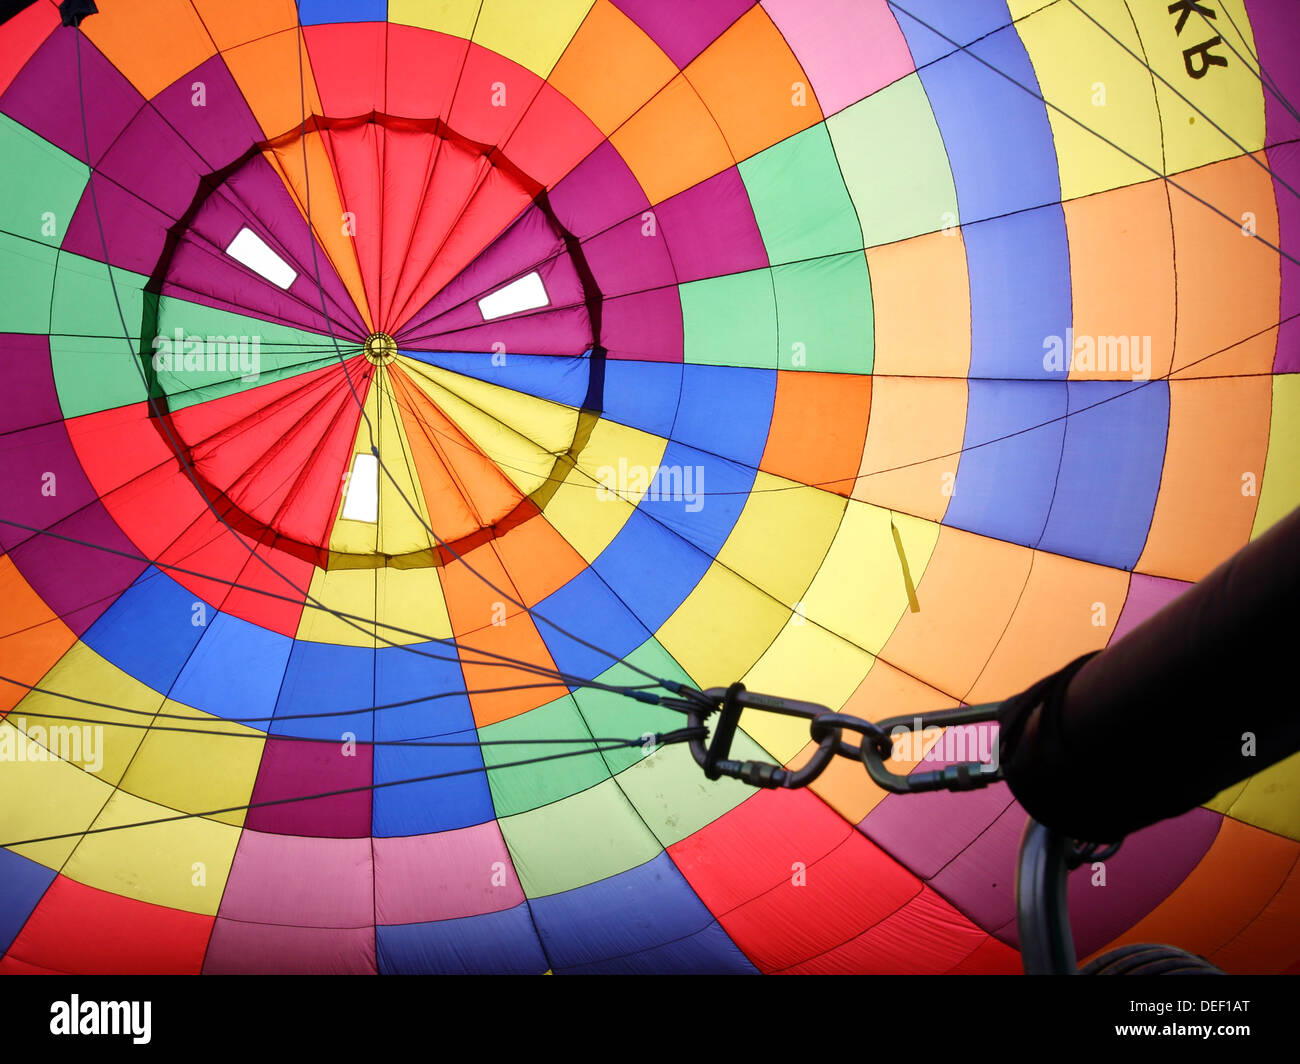 Inside canopy of hot air balloon Stock Photo